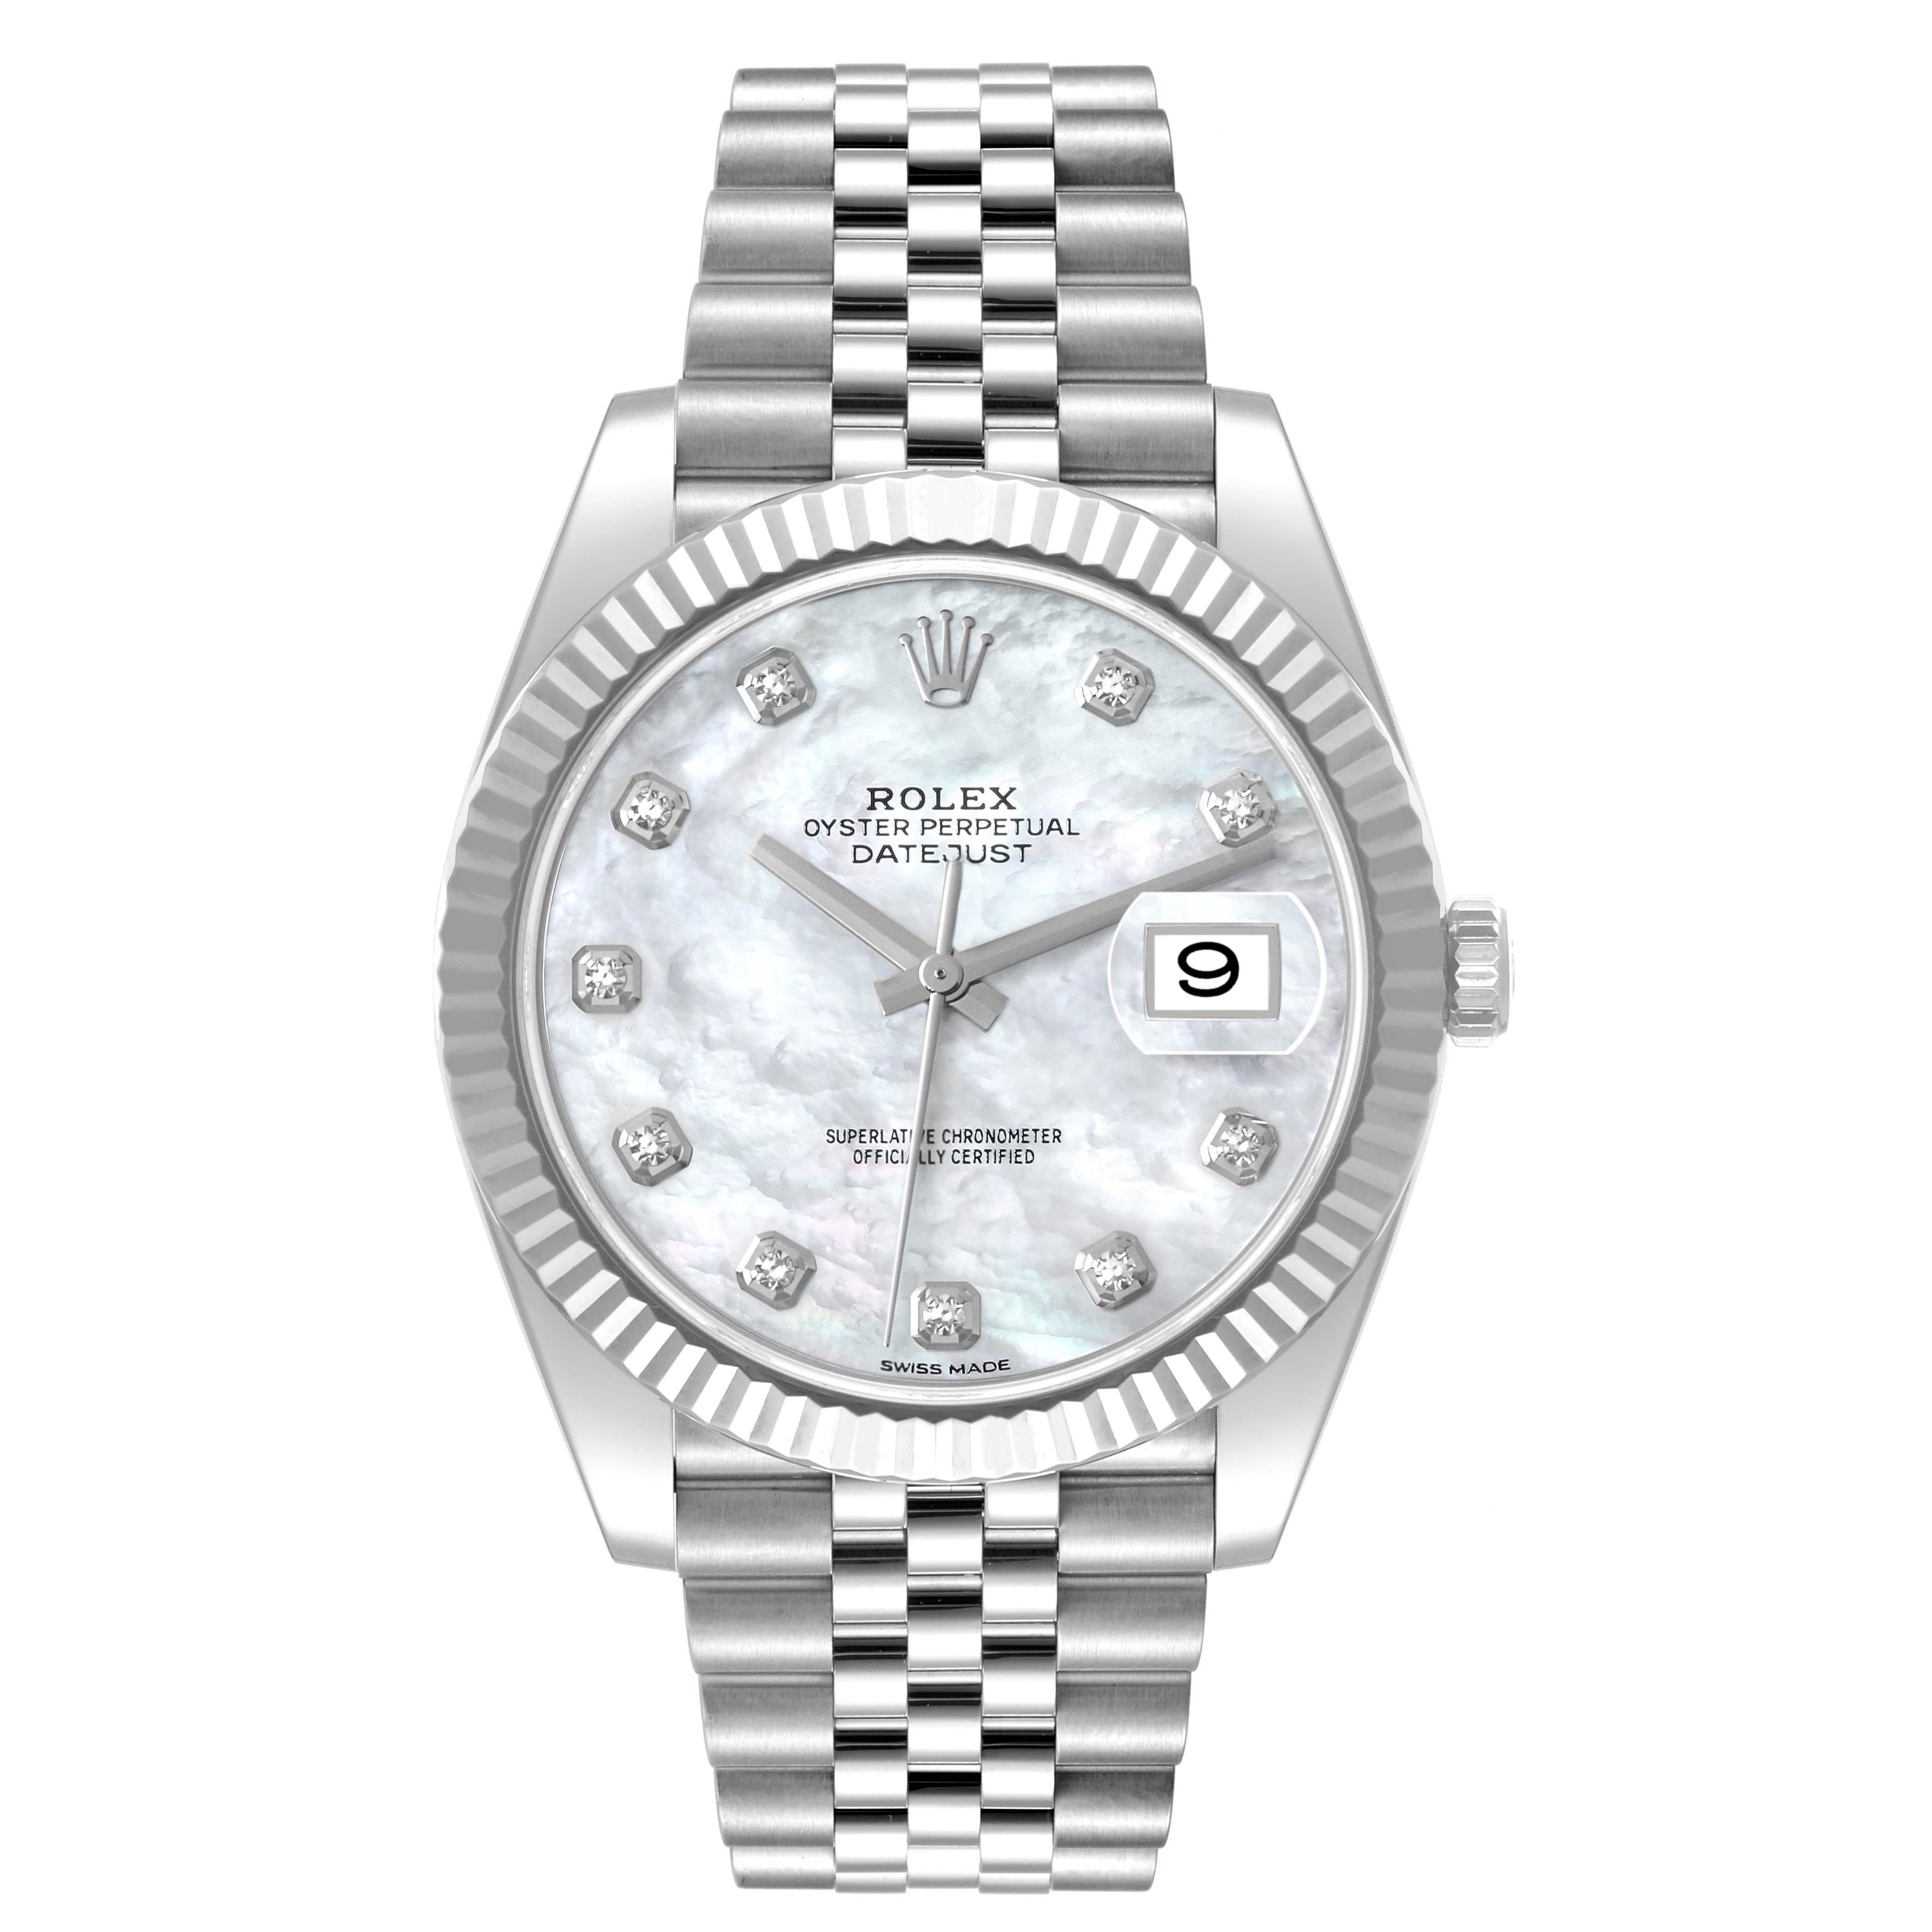 Rolex Datejust 41 Steel White Gold MOP Diamond Dial Mens Watch 126334 Box Card. Officially certified chronometer automatic self-winding movement. Stainless steel case 41 mm in diameter. Rolex logo on the crown. 18K white gold fluted bezel. Scratch